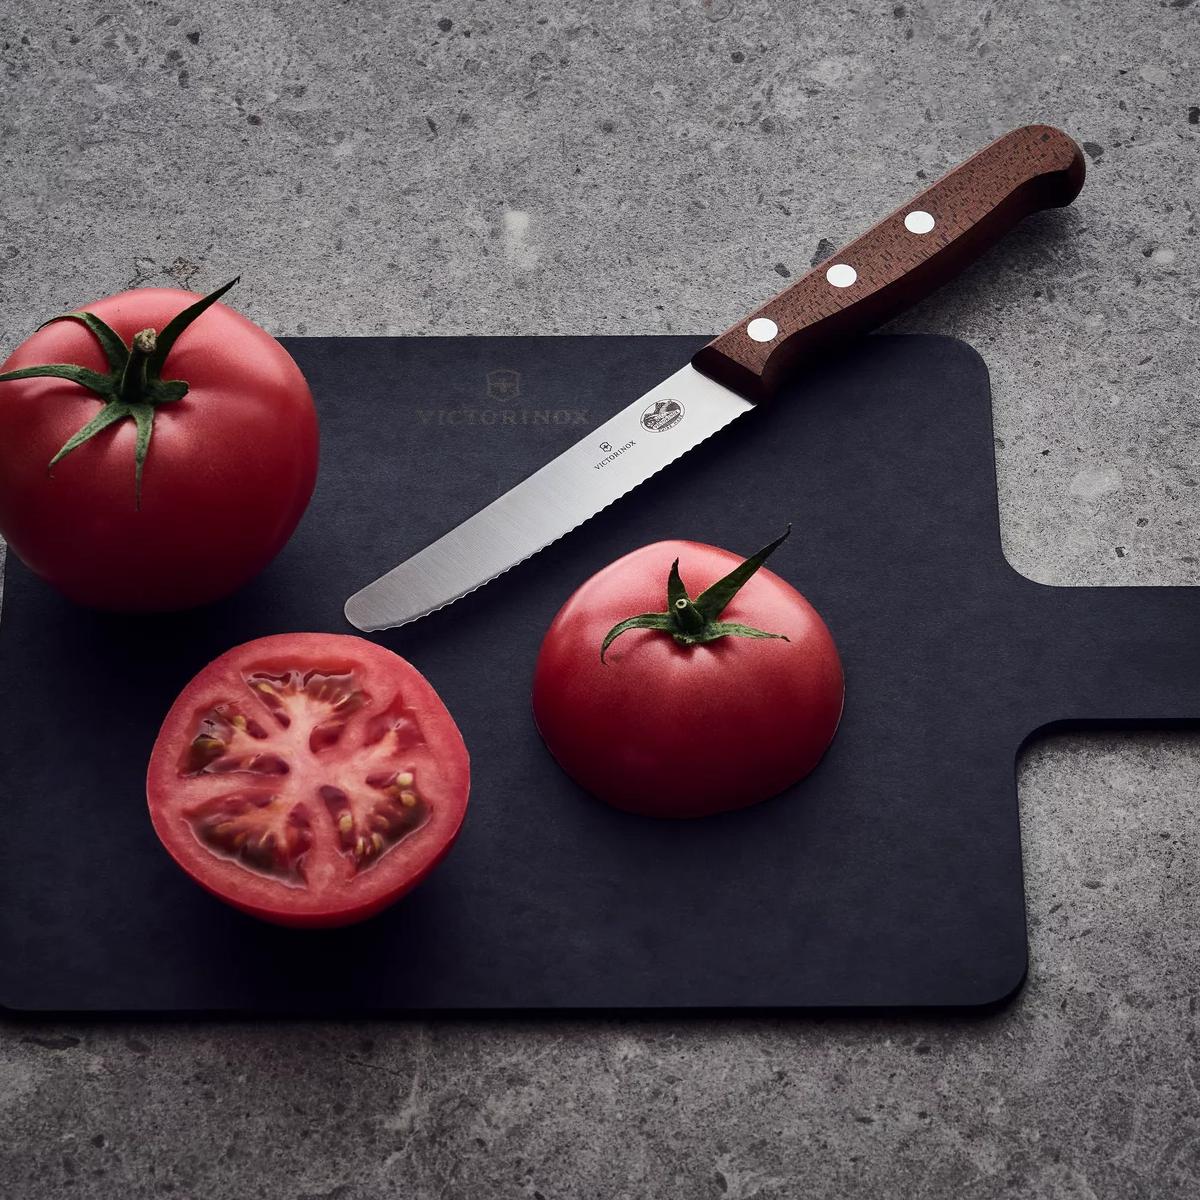 The Tomato and Table Knife